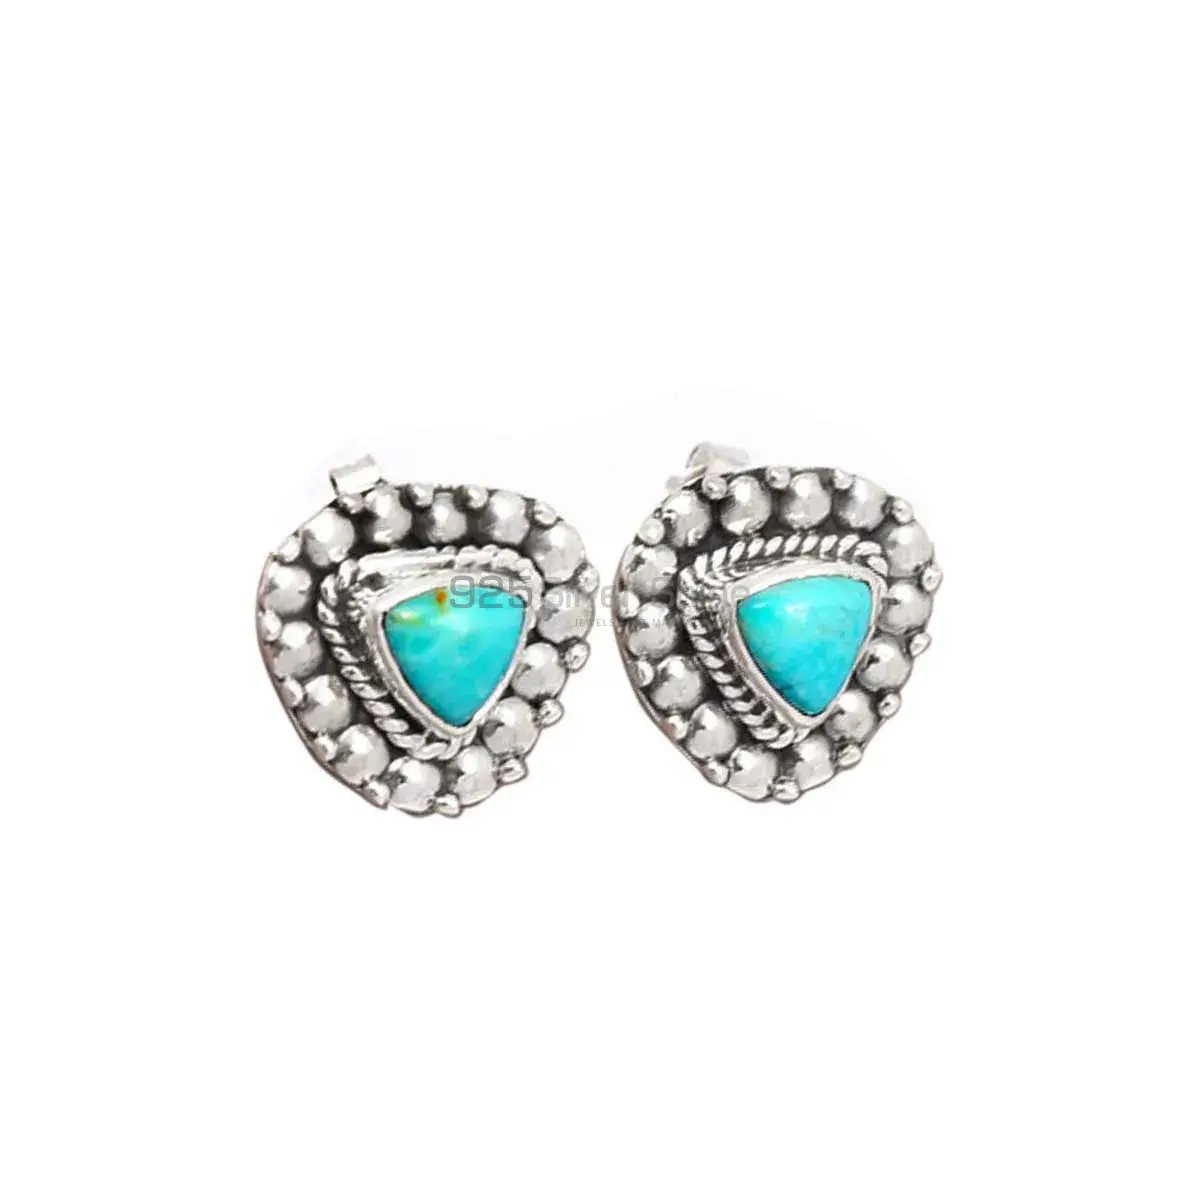 Top Quality 925 Sterling Silver Earrings In Turquoise Gemstone Jewelry 925SE2687